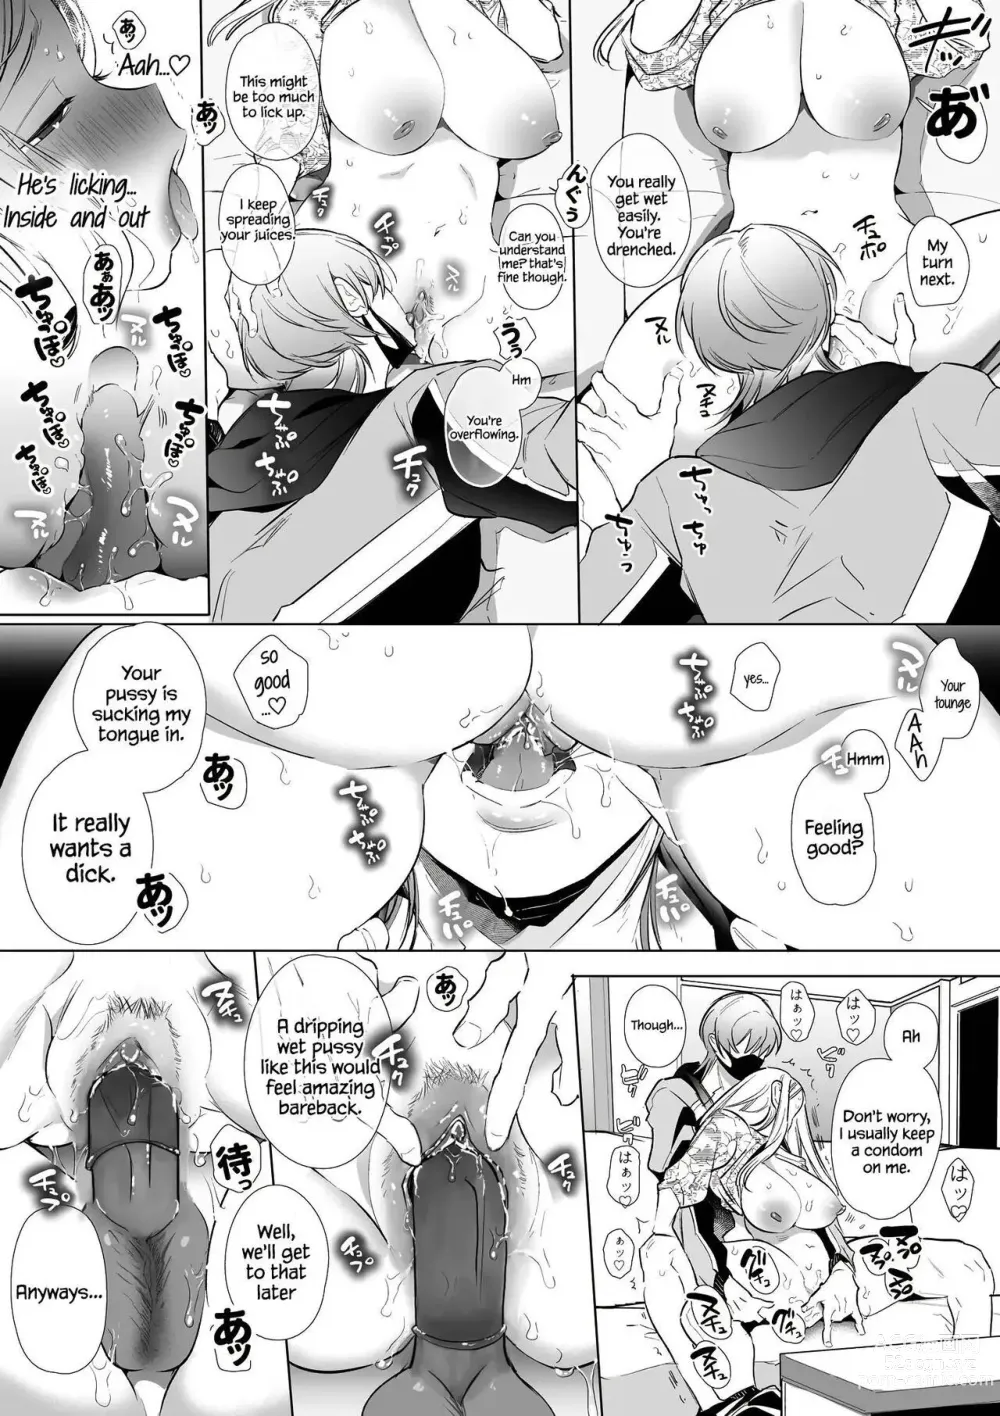 Page 28 of doujinshi Kana-san NTR ~ Degradation of a Housewife by a Guy in an Alter Account ~ (decensored)